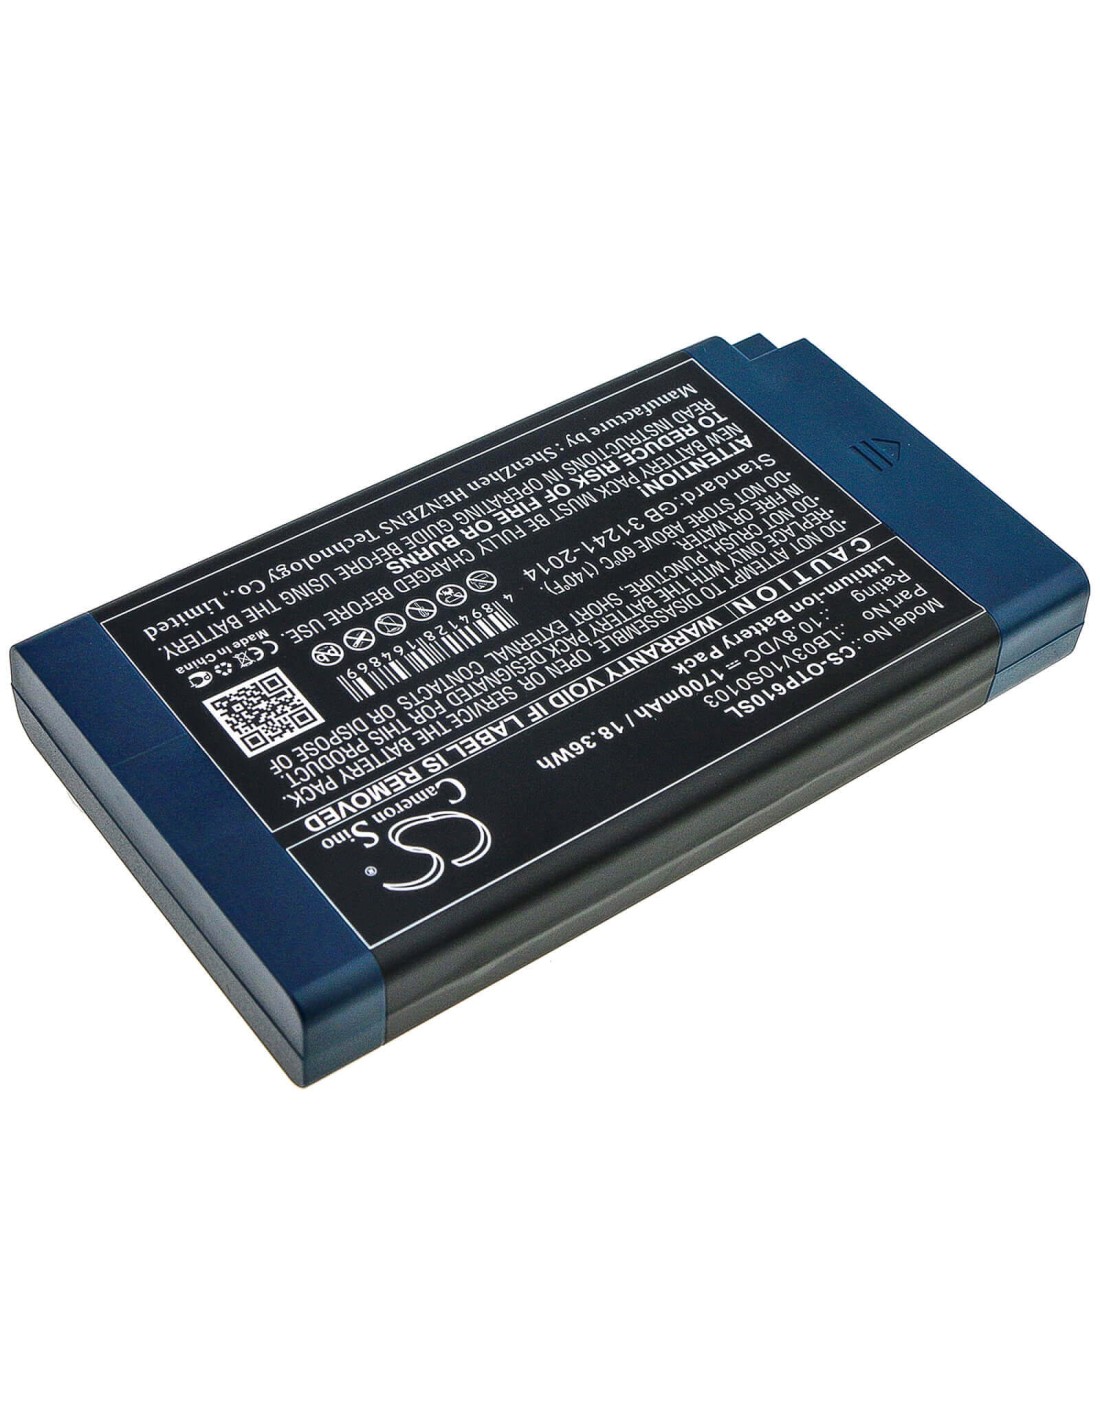 Battery for Opwill, Opt6123l, Otp6103, Otp-6103 10.8V, 1700mAh - 18.36Wh